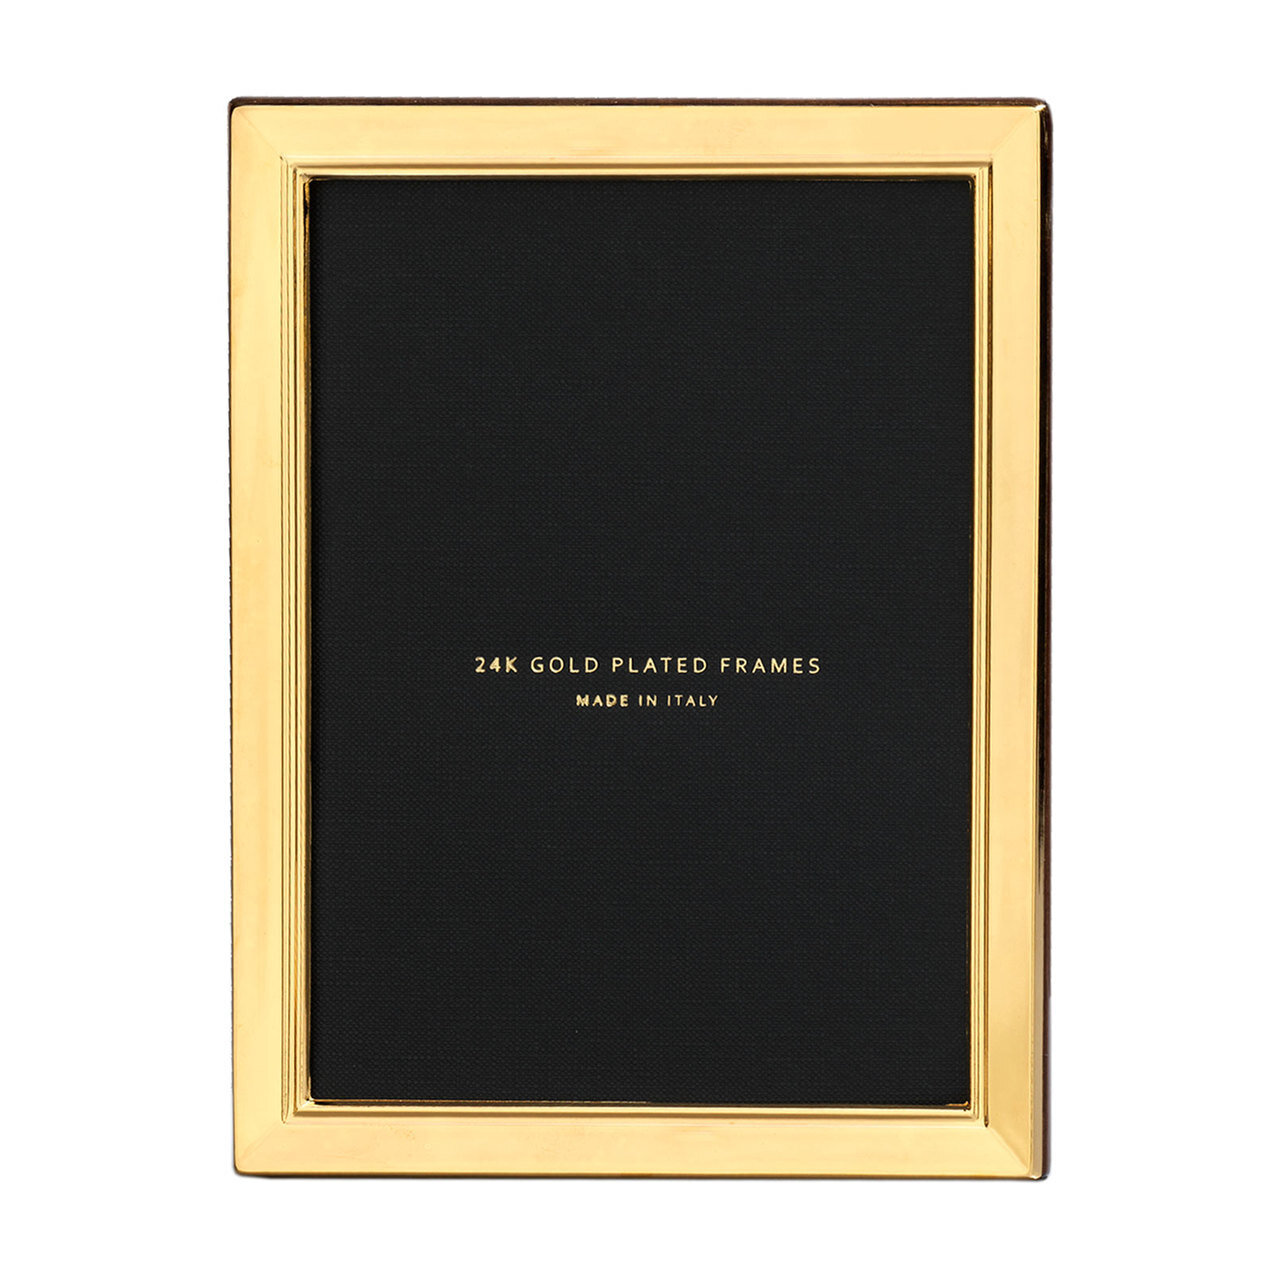 Cunill Metropolis 4 x 6 Inch Picture Frame - 24k Gold Plated 0.5 Microns